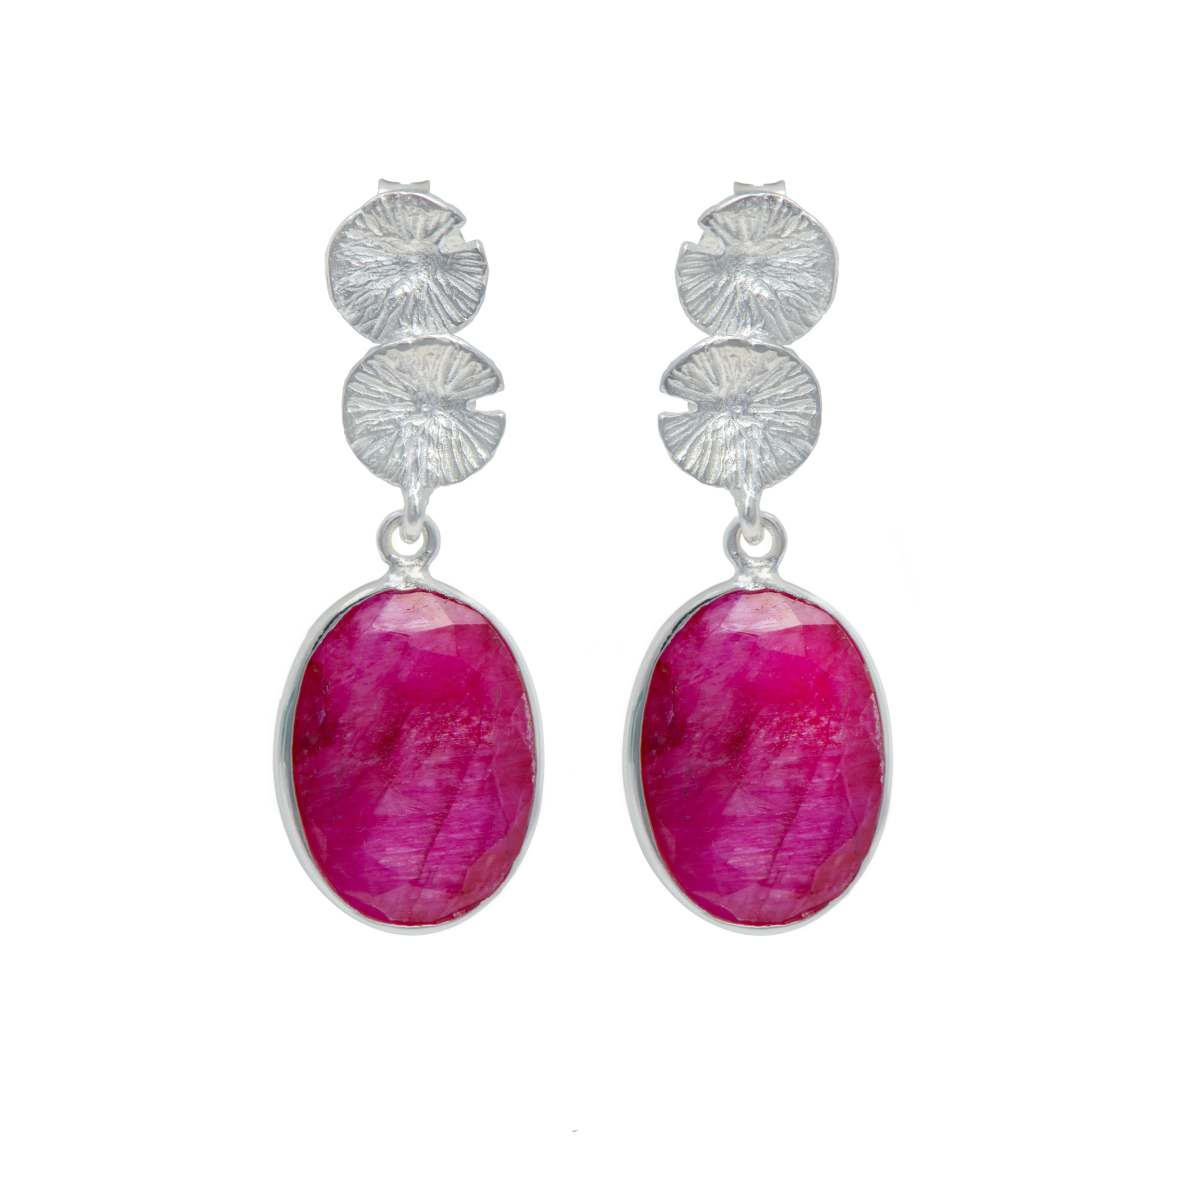 Lily Pad Earrings in Sterling Silver with a Ruby Quartz Gemstone Drop